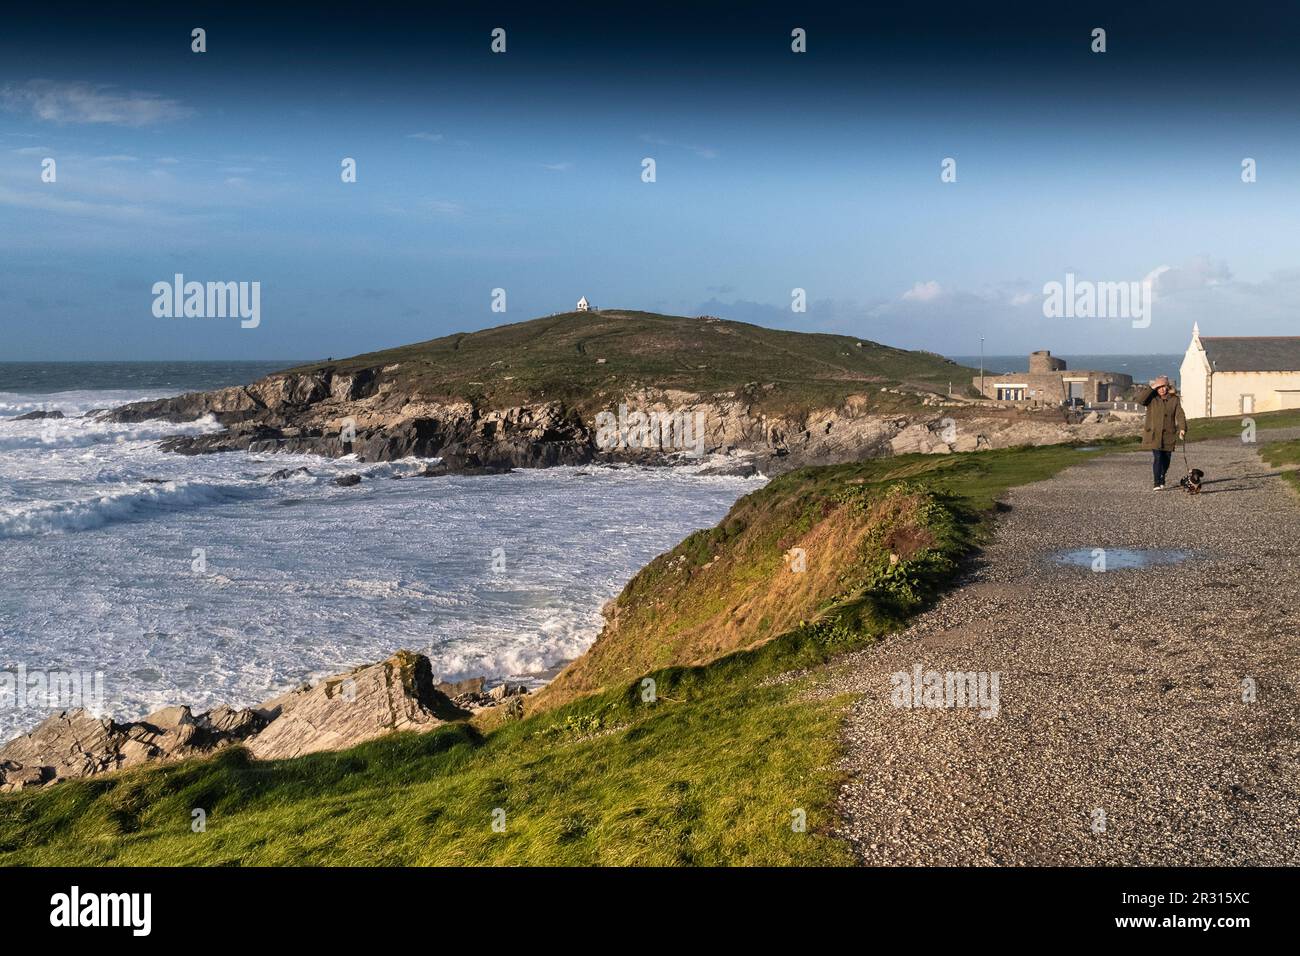 UK weather. Rough sea at Little Fistral Towan Head on the coast of Newquay in Cornwall in England in the UK. Stock Photo